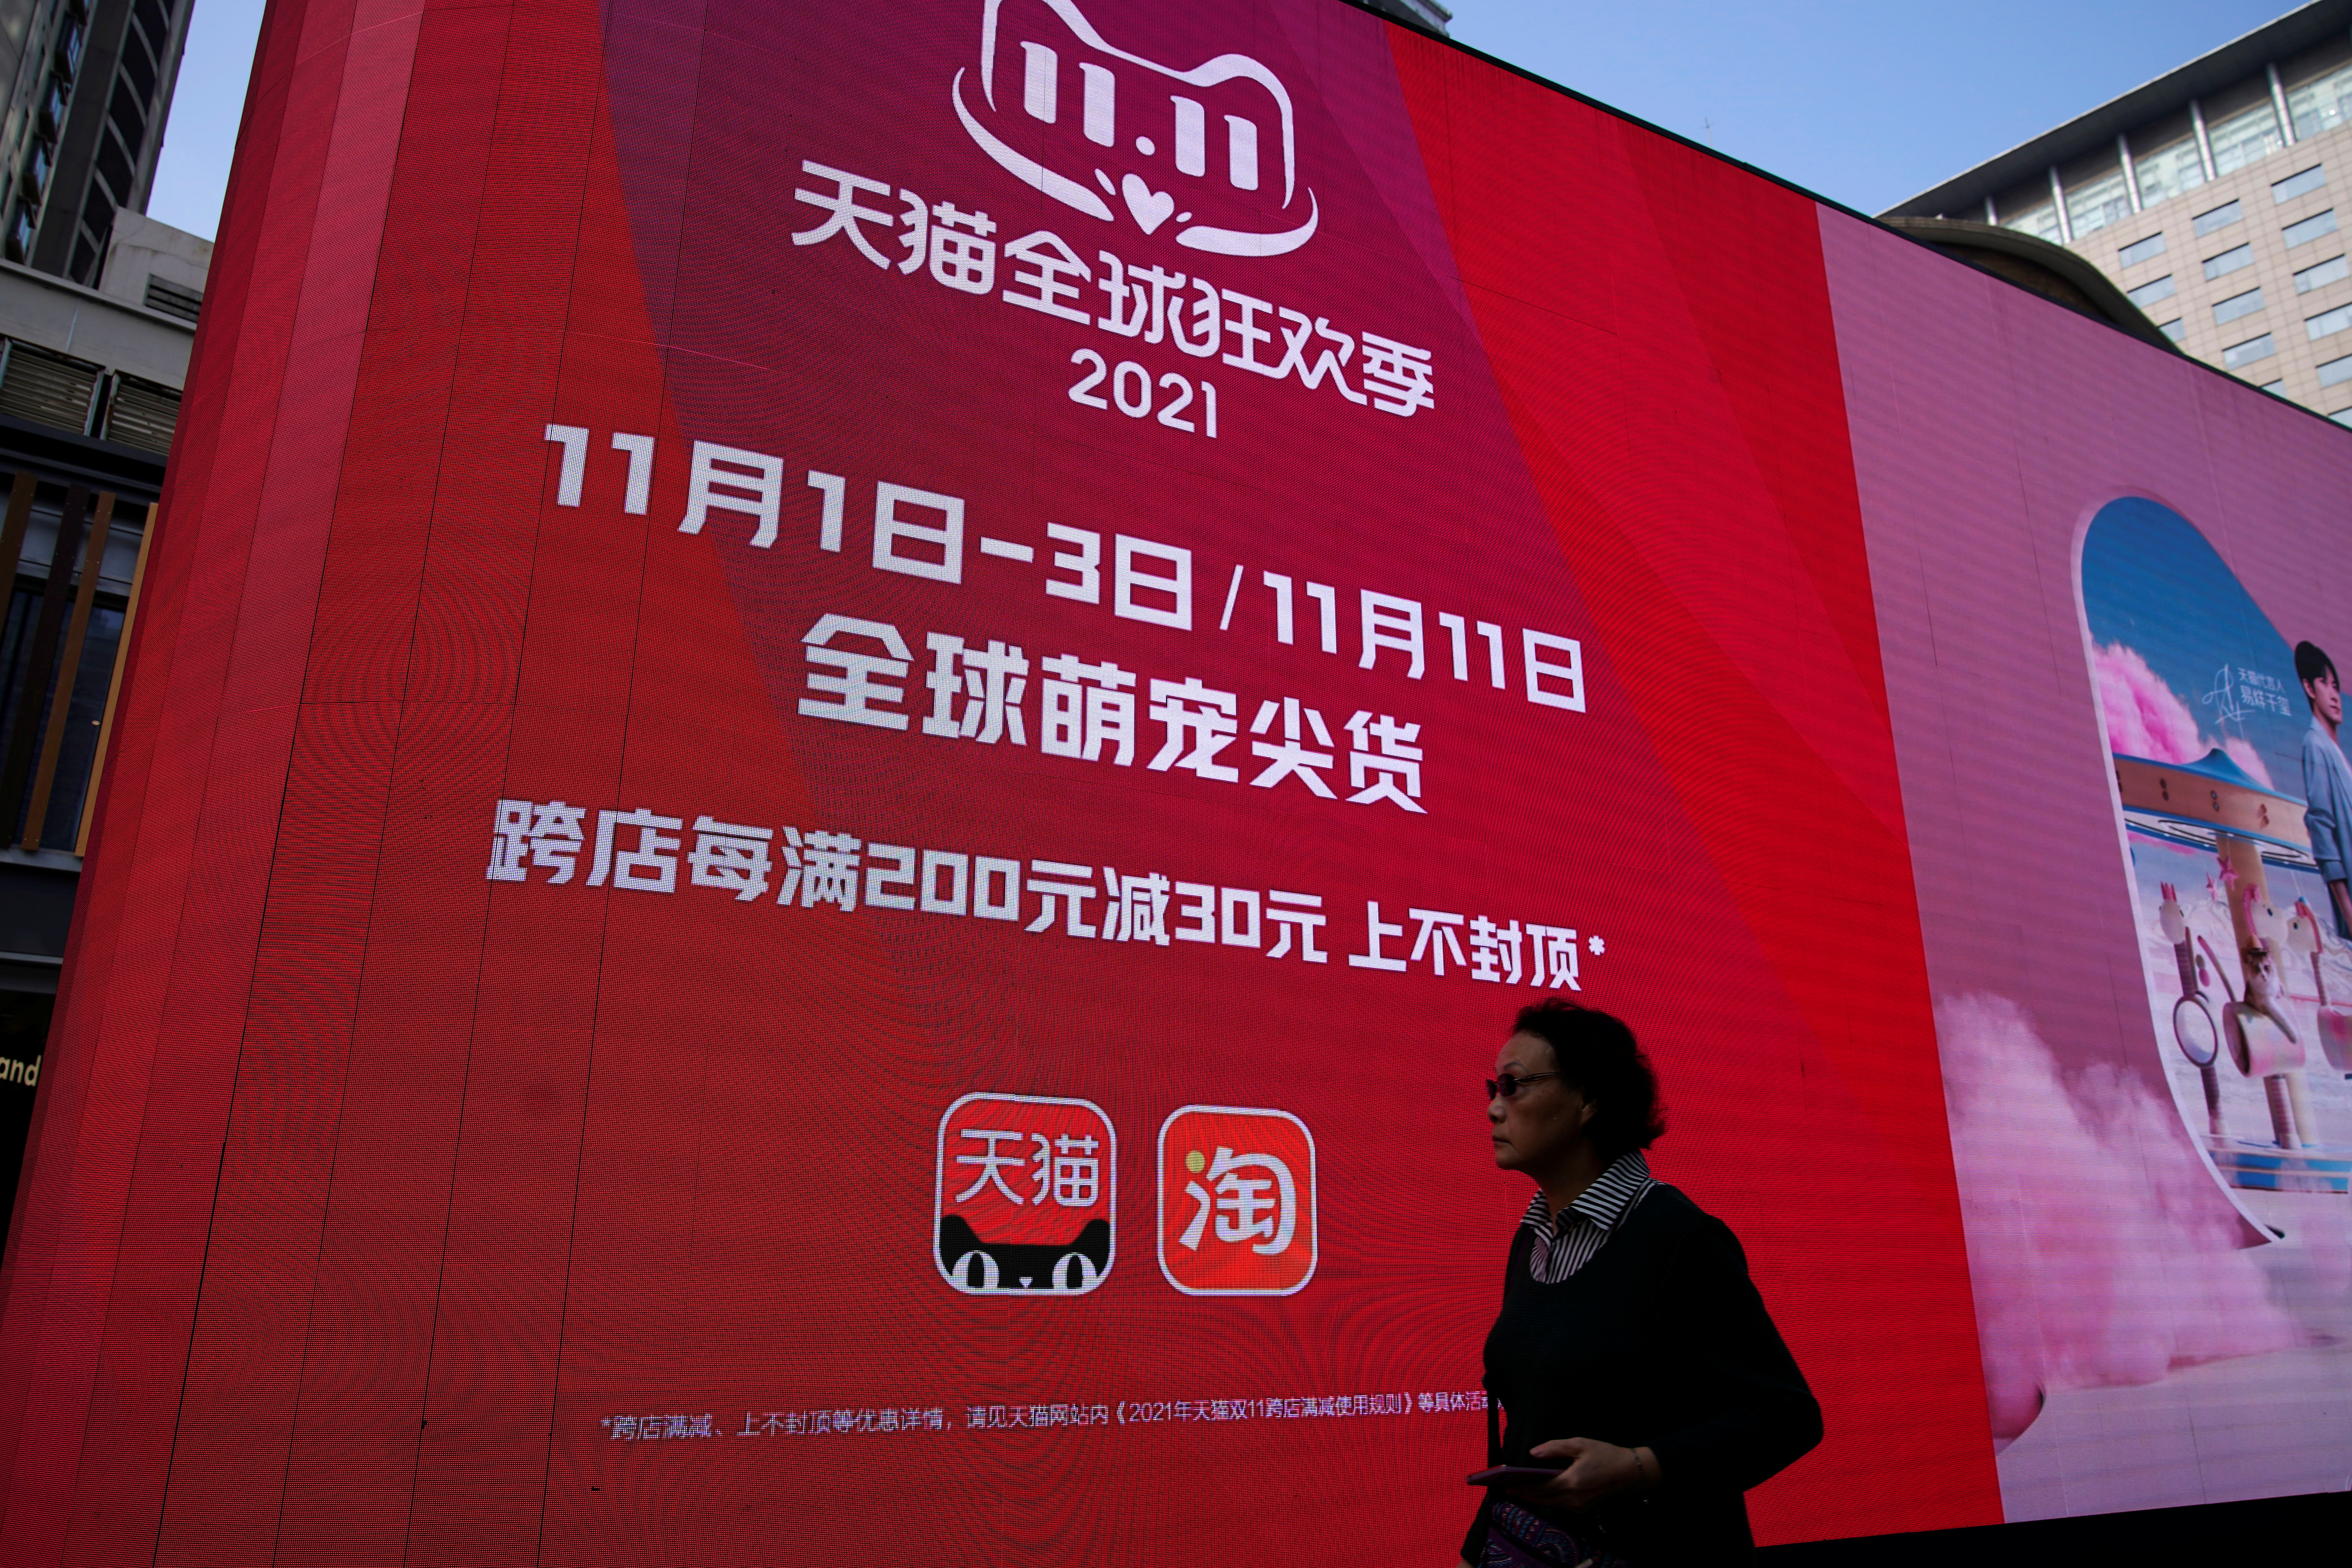 Advertisement to promote Alibaba's Singles' Day shopping festival in Shanghai